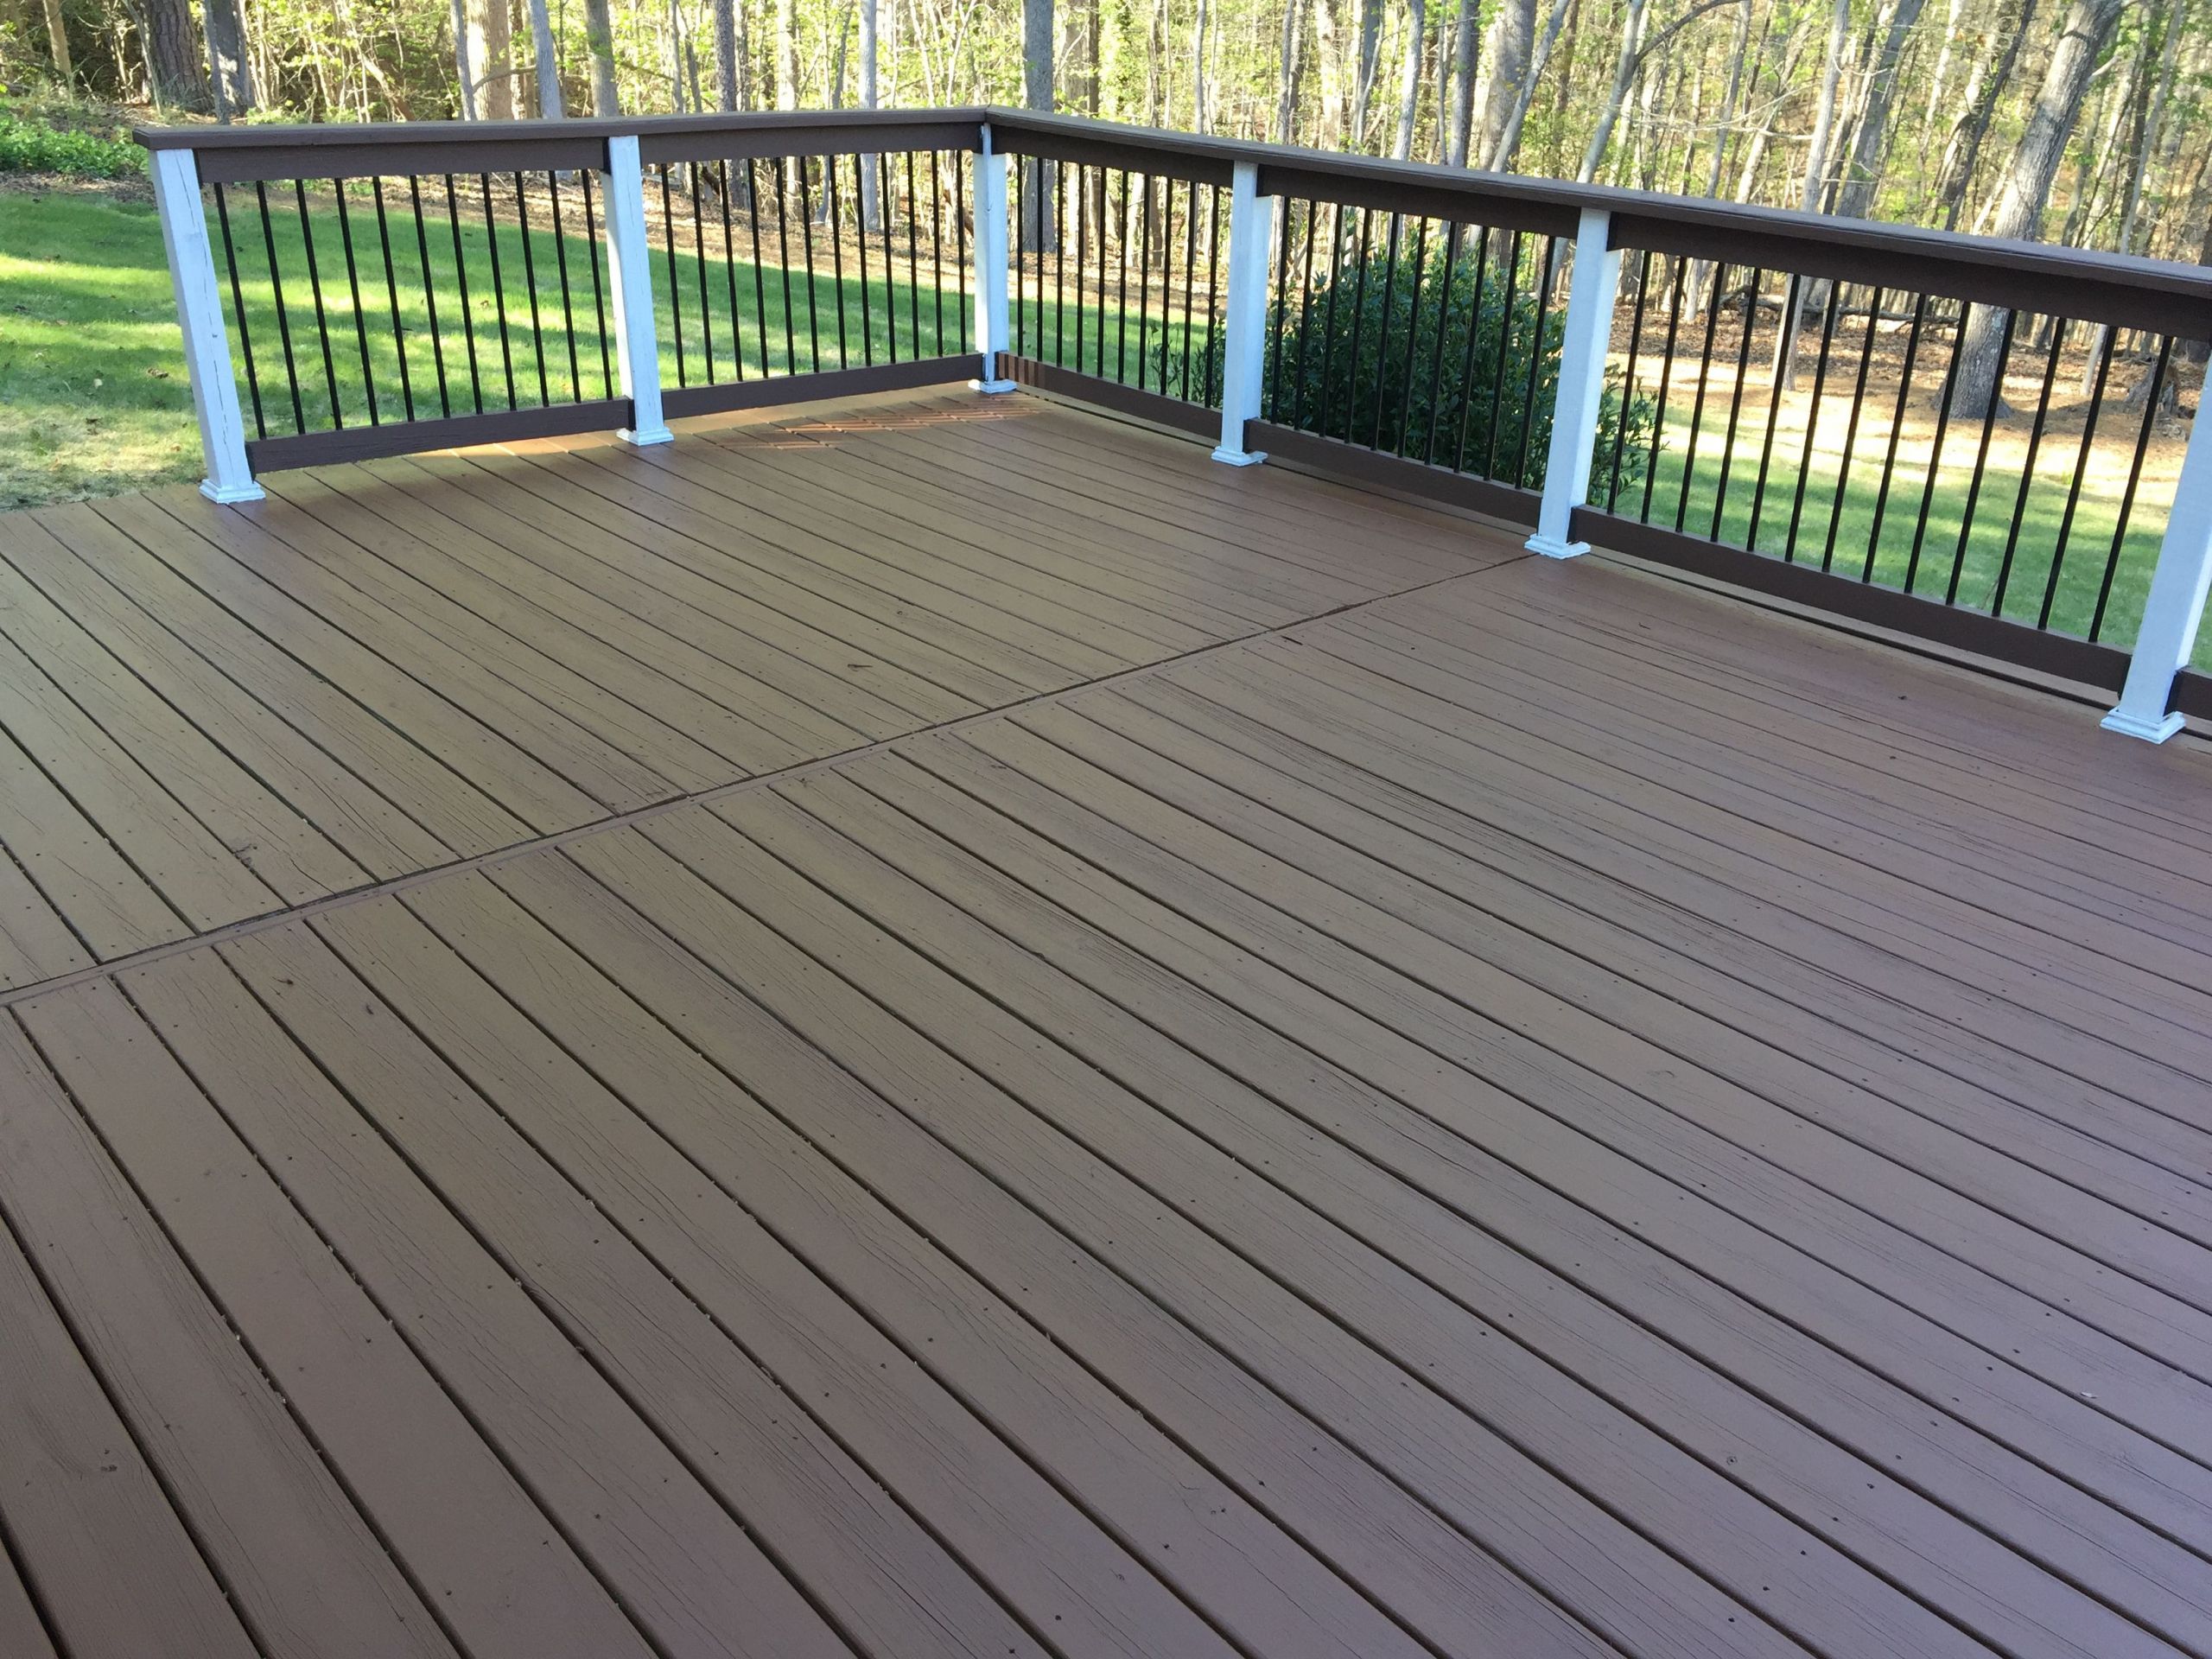 Exterior Deck Paints
 Did the deck today and love the double shade deck paint